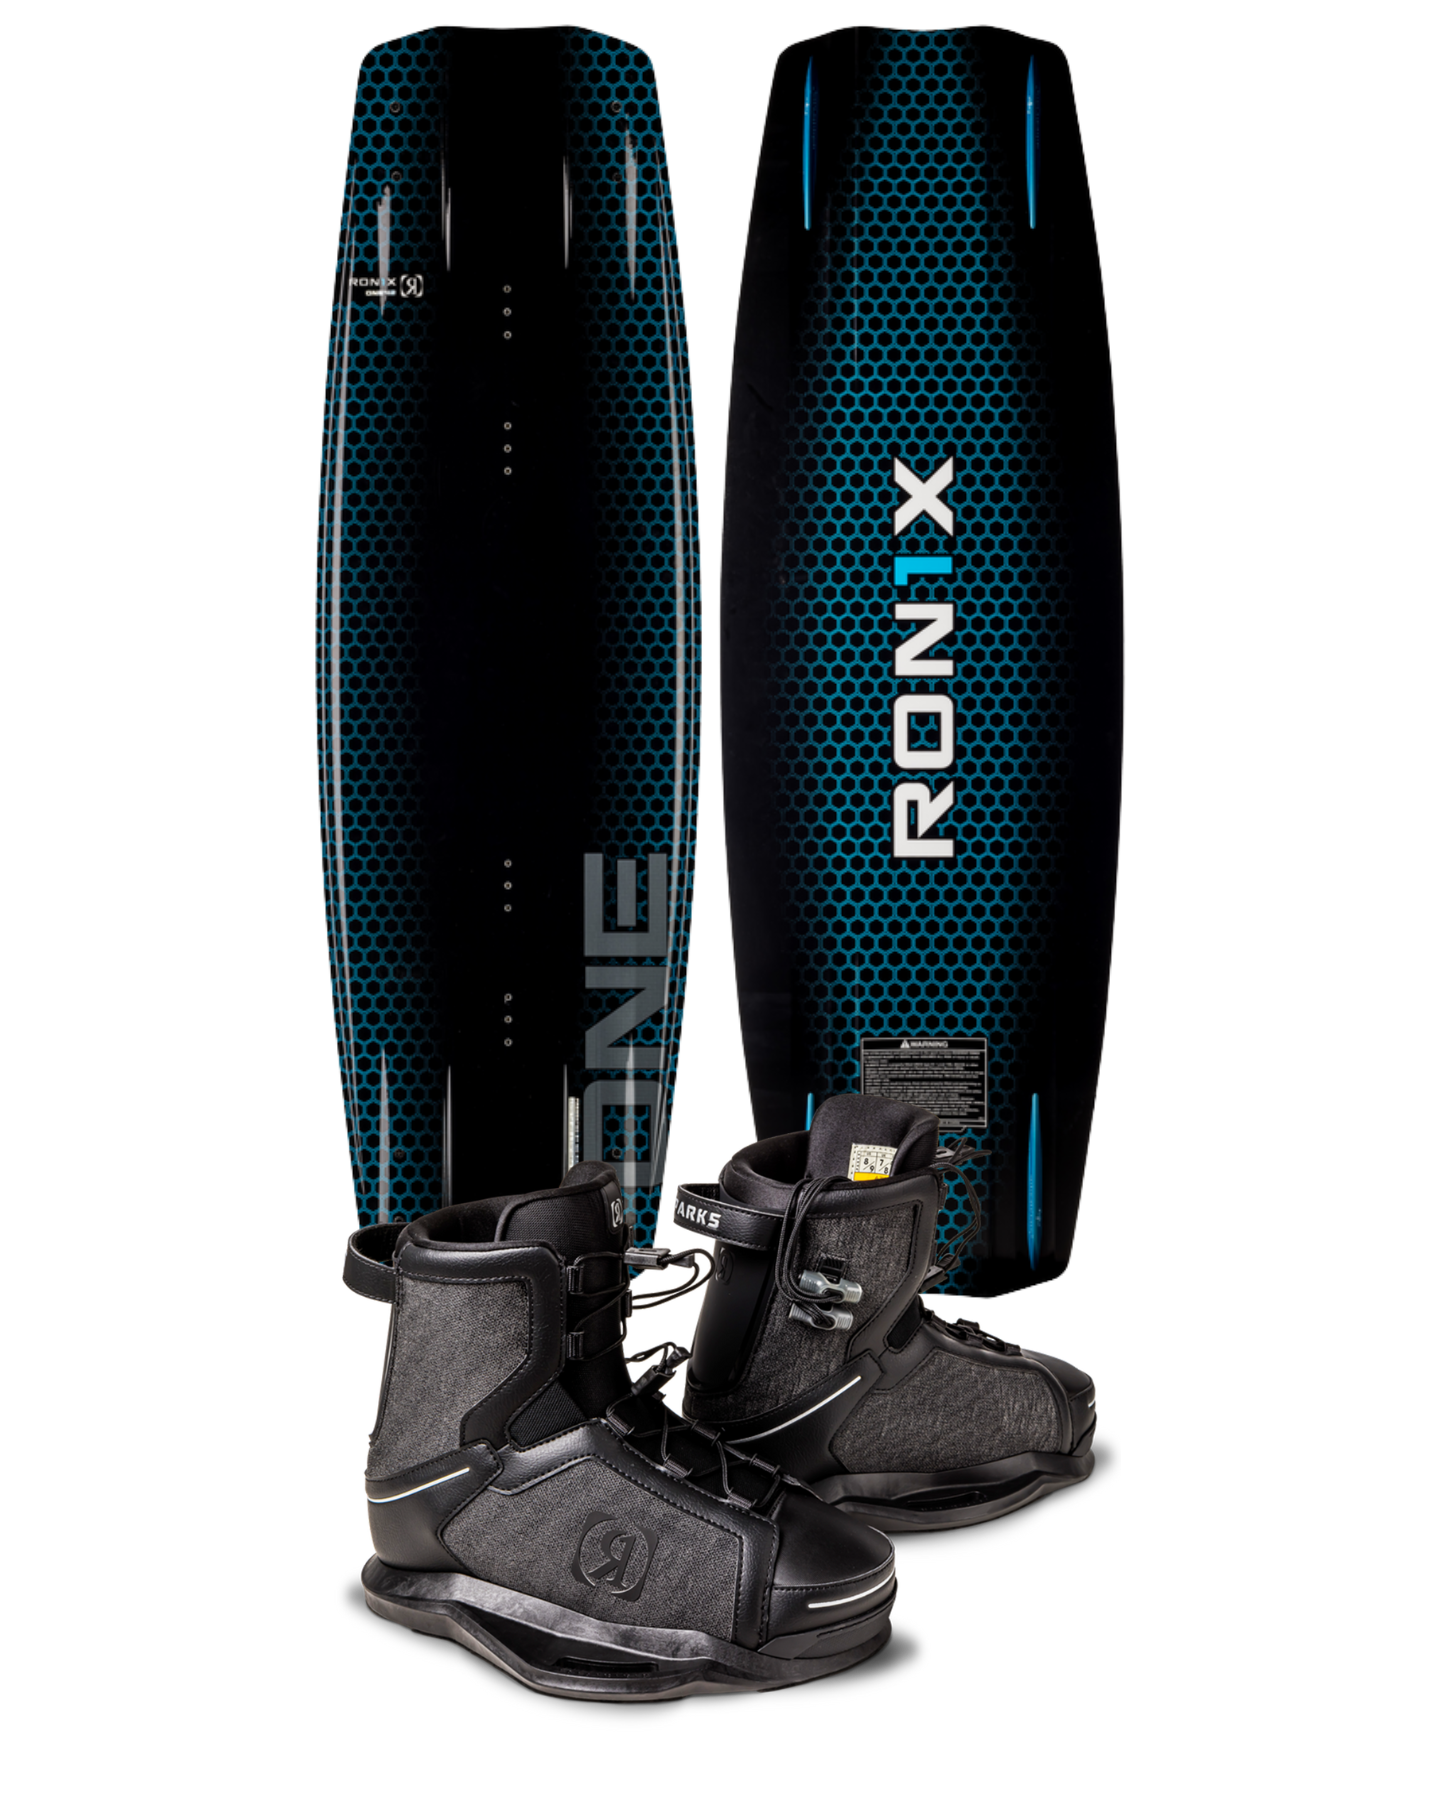 Ronix One Blackout with Parks Boots Wakeboard Packages - Mens - Trojan Wake Ski Snow